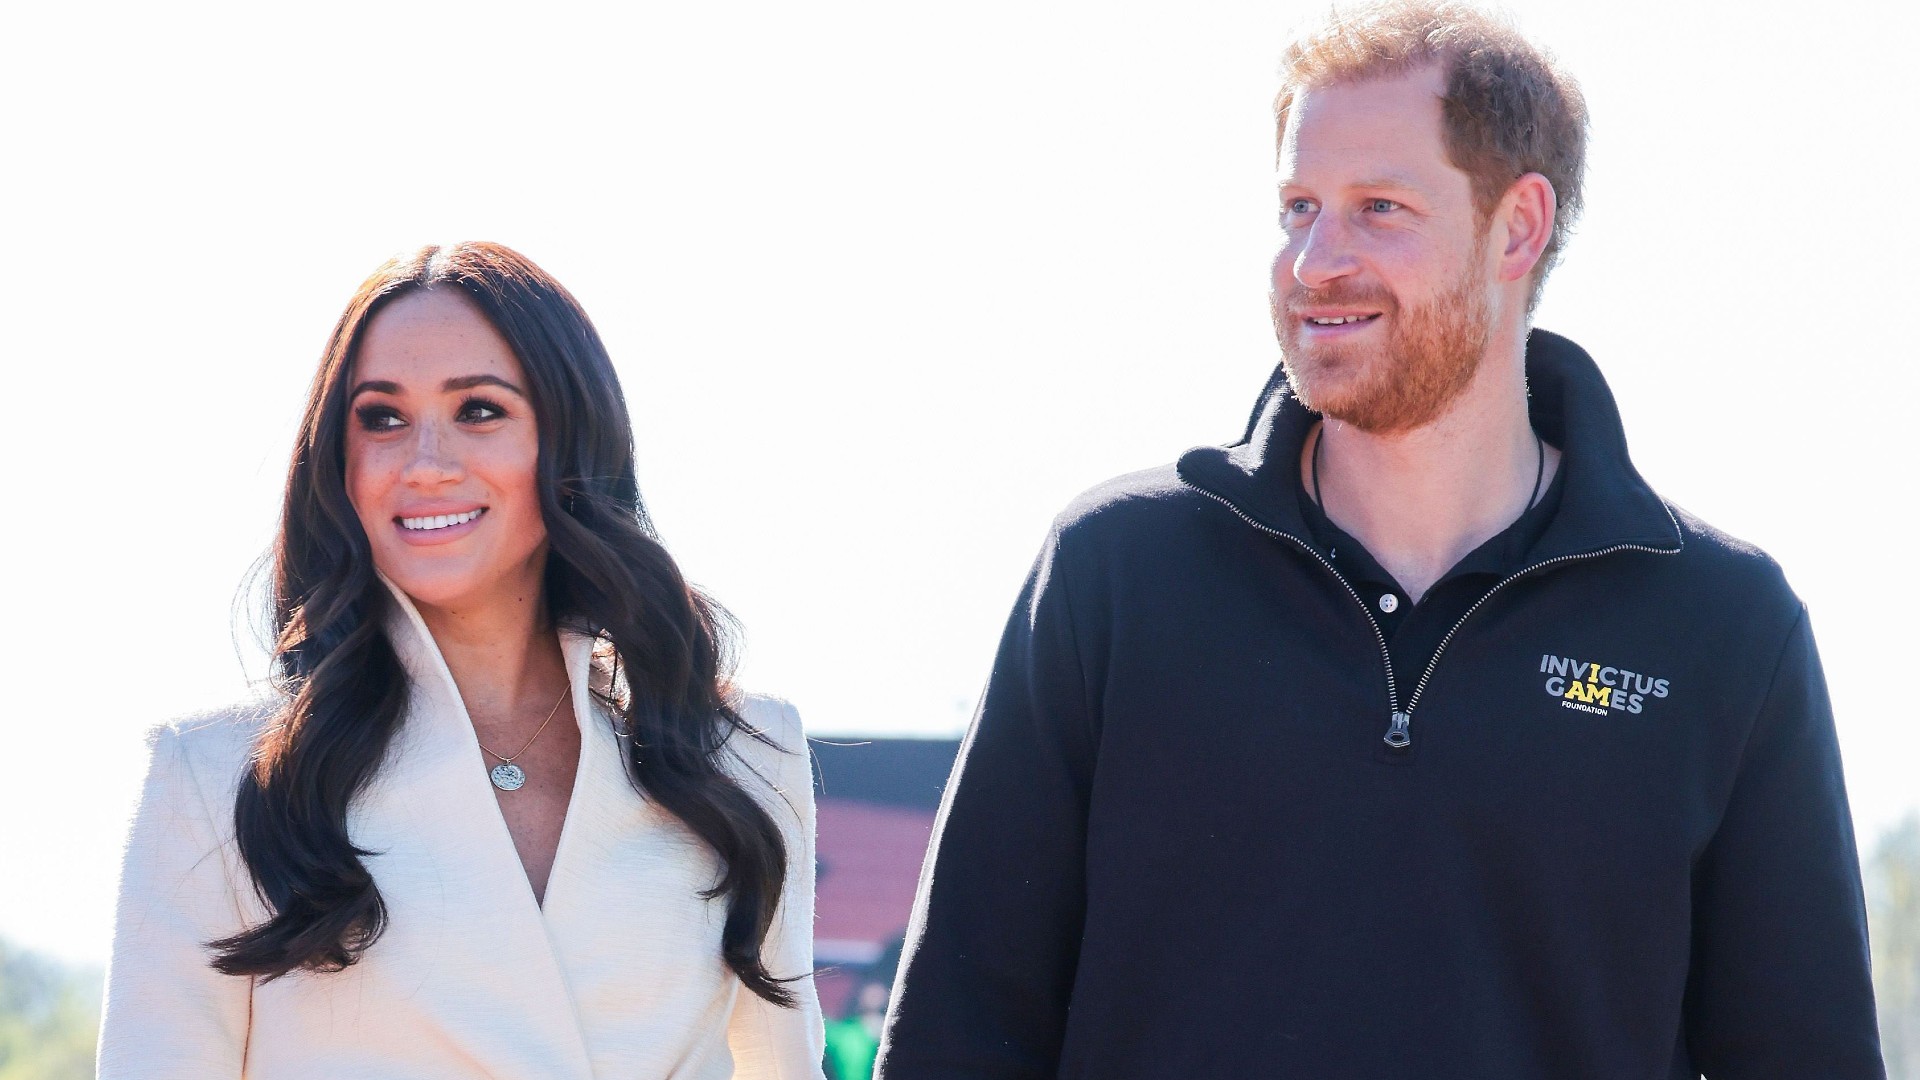 Prince Harry and Meghan Markle Hope the Few Months After Docuseries and Book Release Will “Cool Tensions” Before King Charles’ Coronation